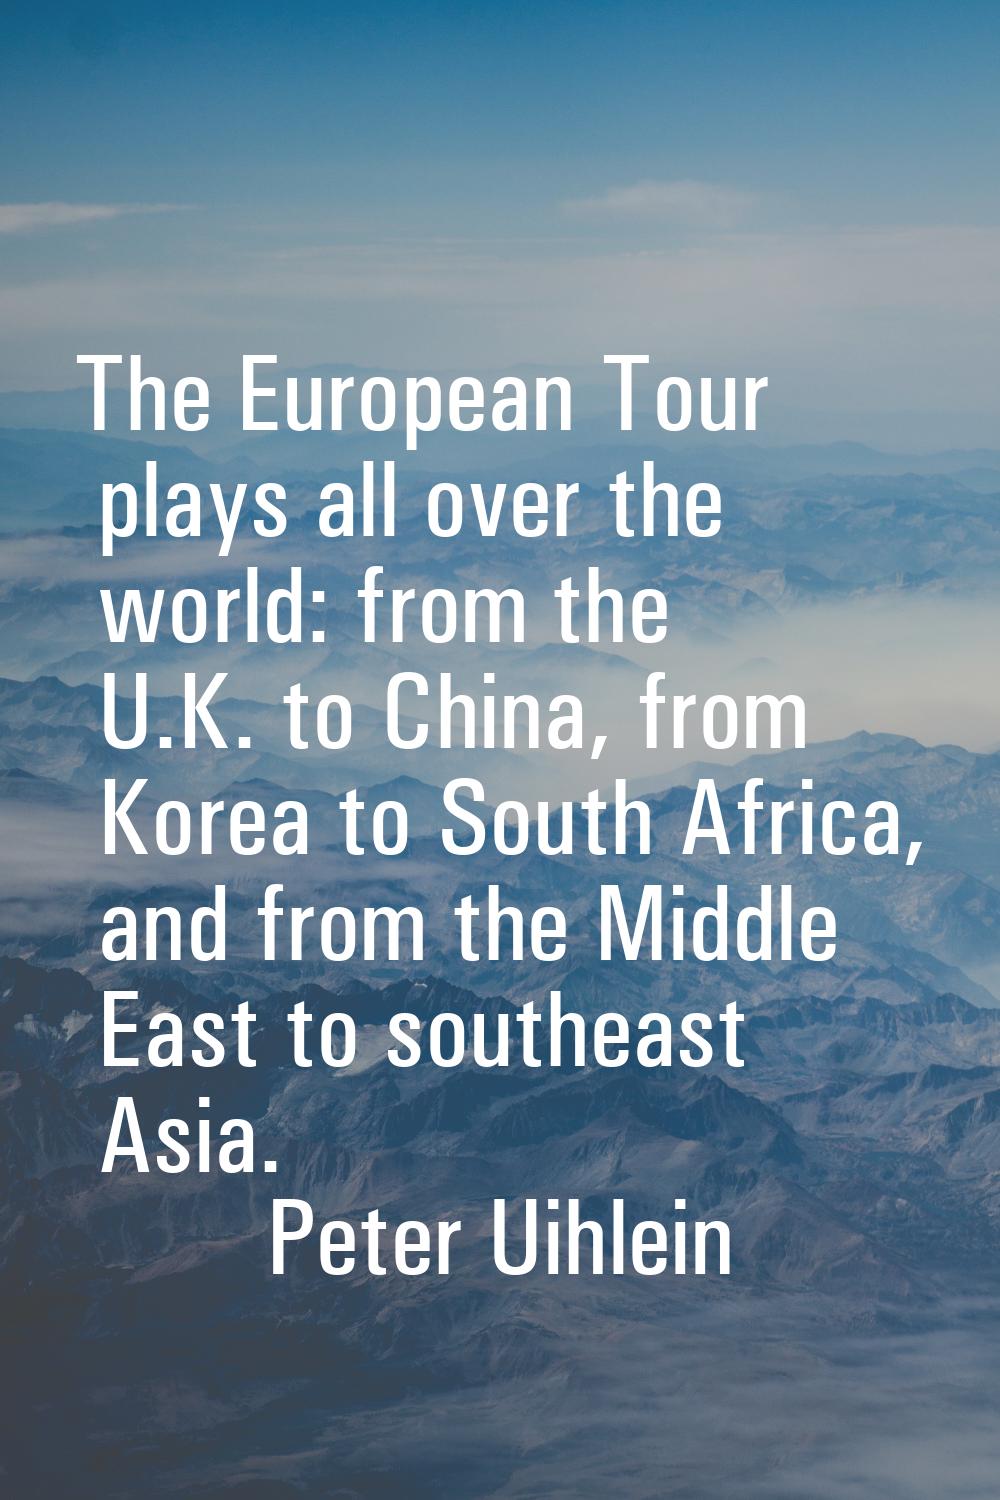 The European Tour plays all over the world: from the U.K. to China, from Korea to South Africa, and